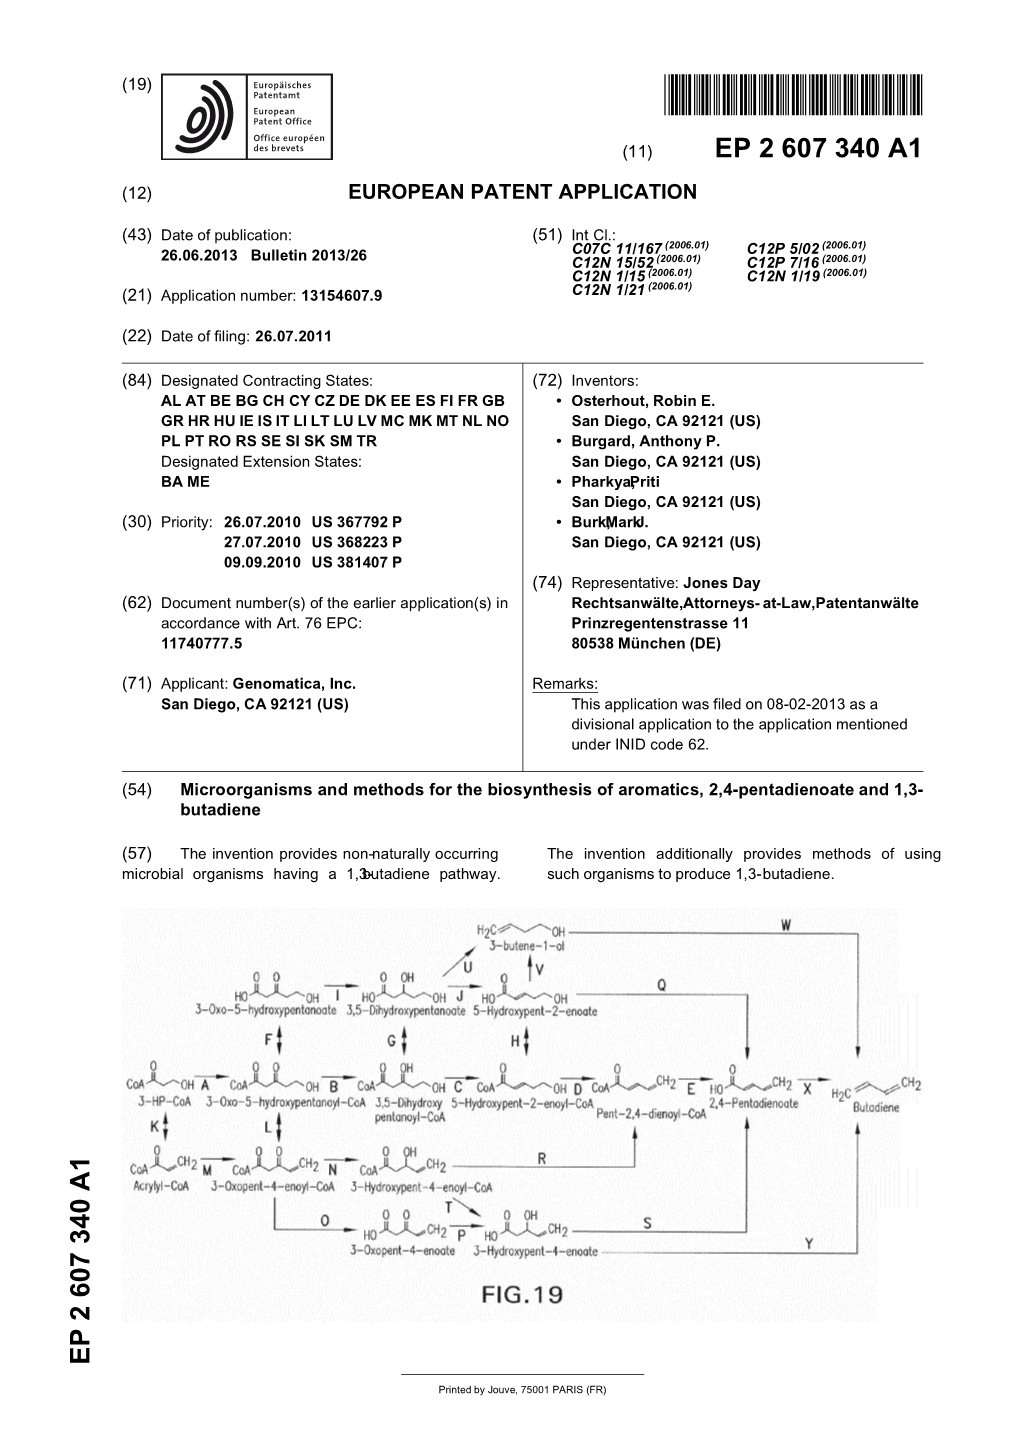 Microorganisms and Methods for the Biosynthesis of Aromatics, 2,4-Pentadienoate and 1,3- Butadiene